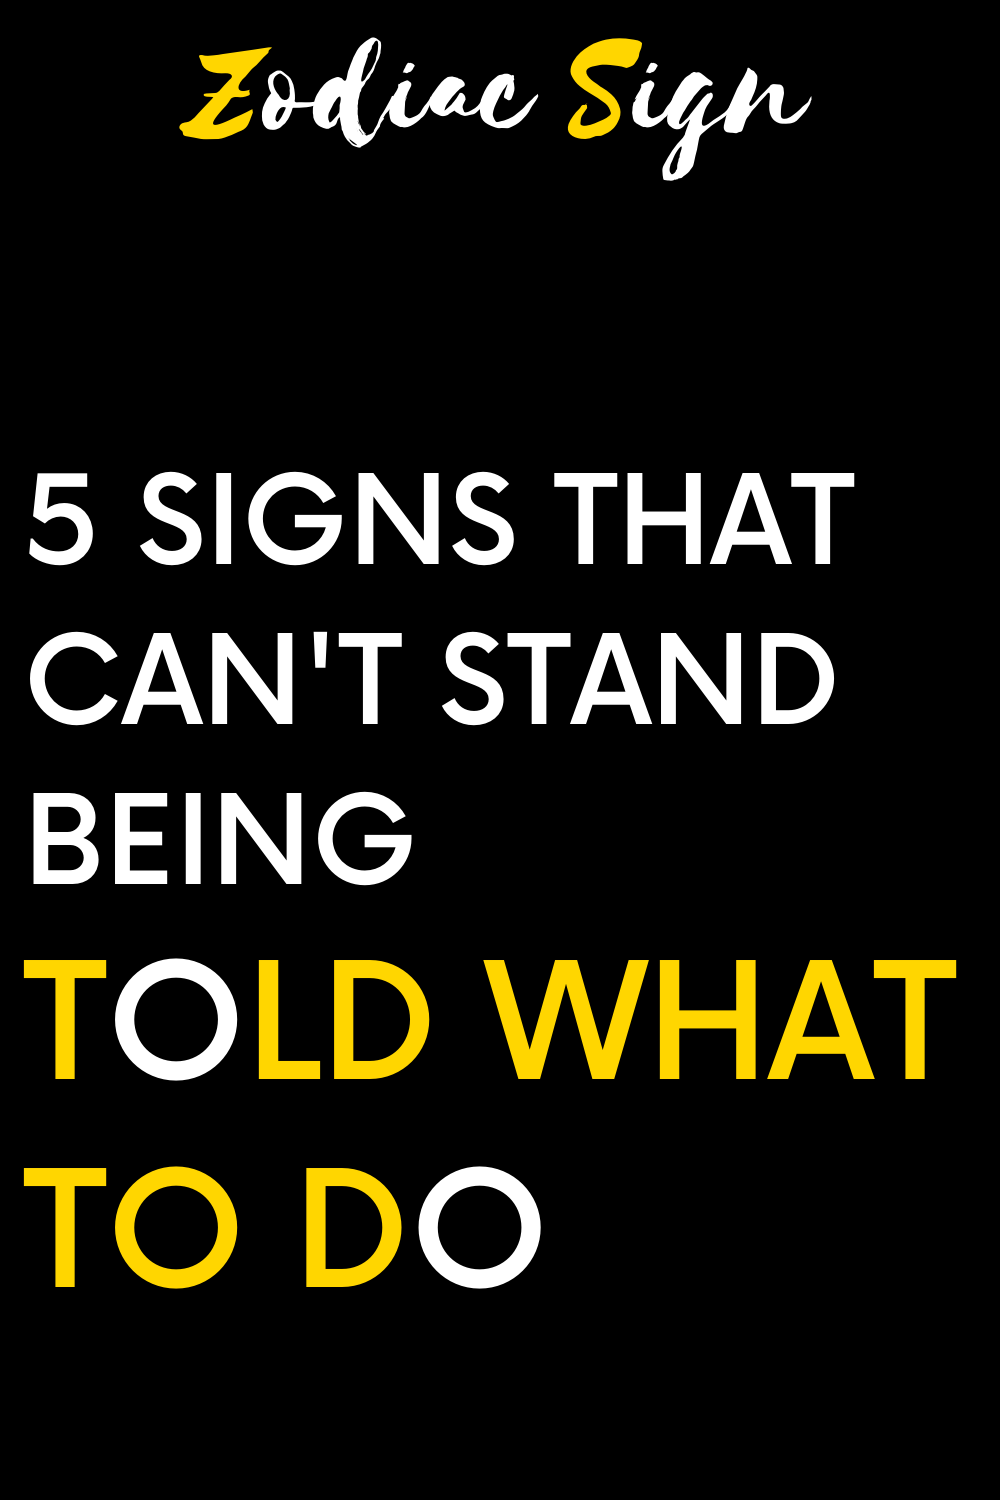 5 signs that can't stand being told what to do